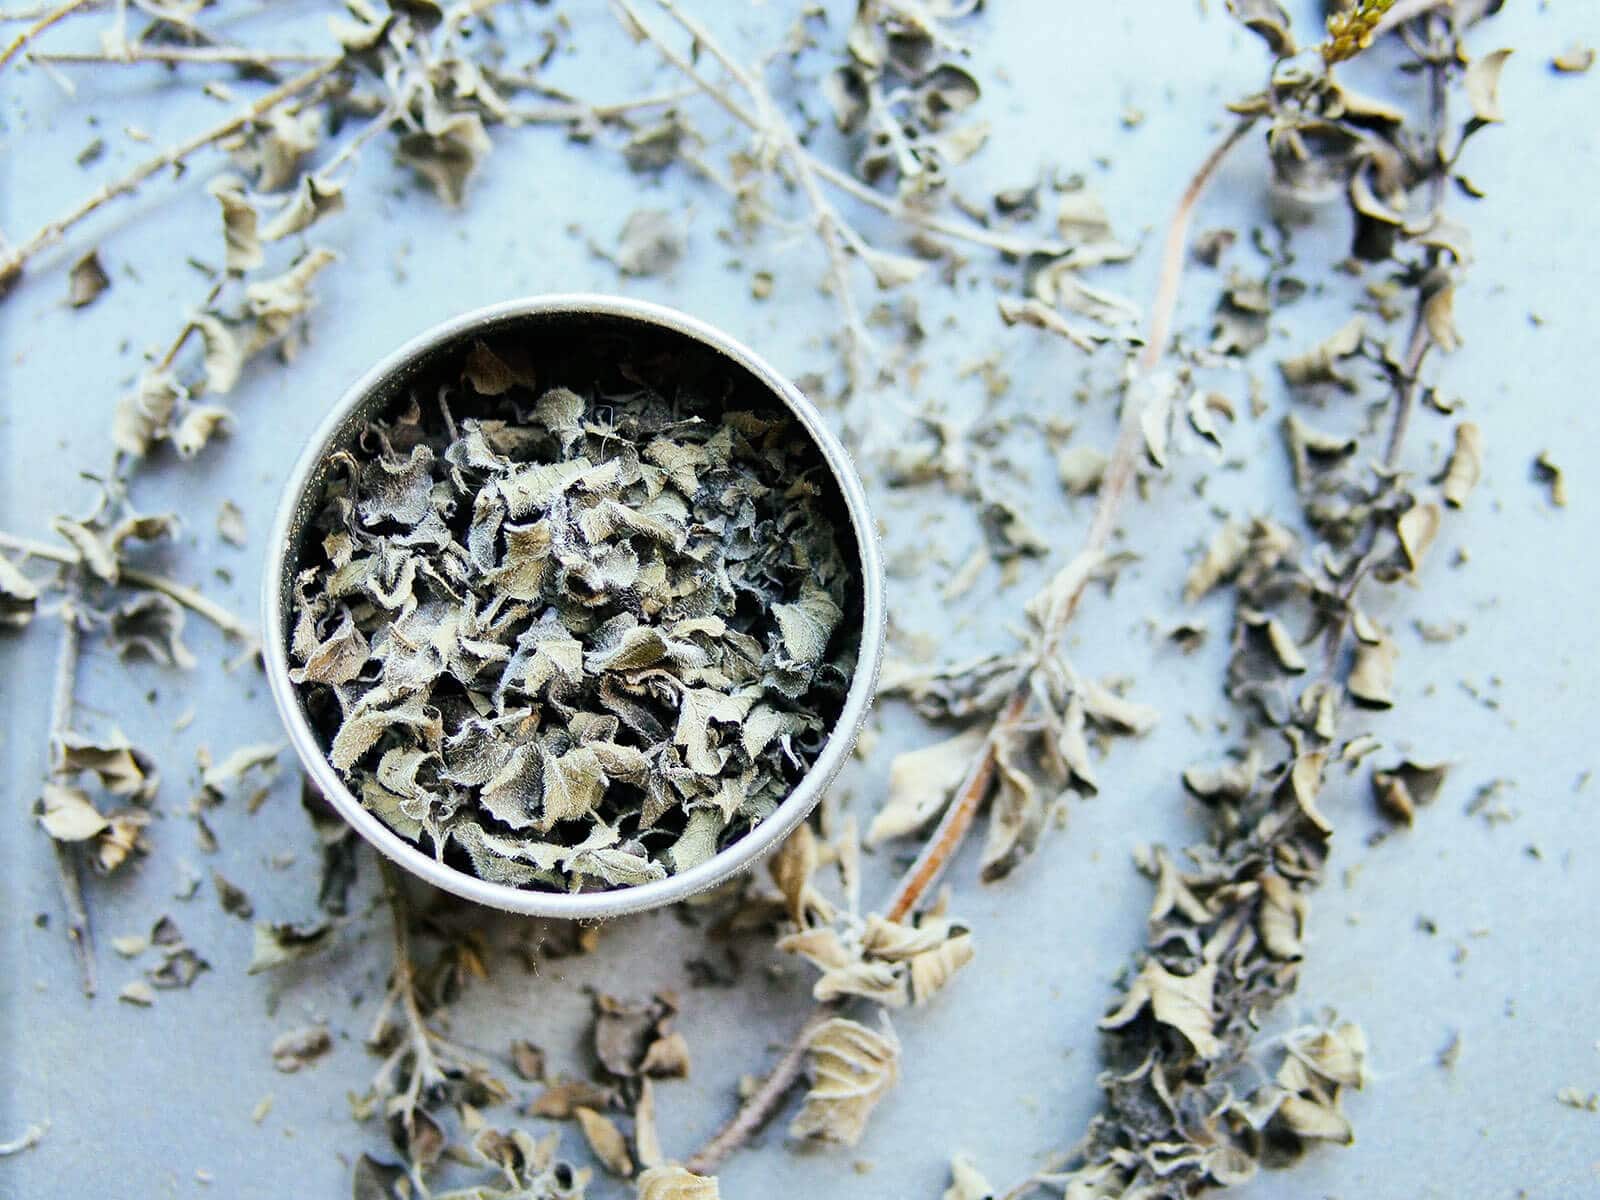 Drying and Storing Oregano for Long-Term Use